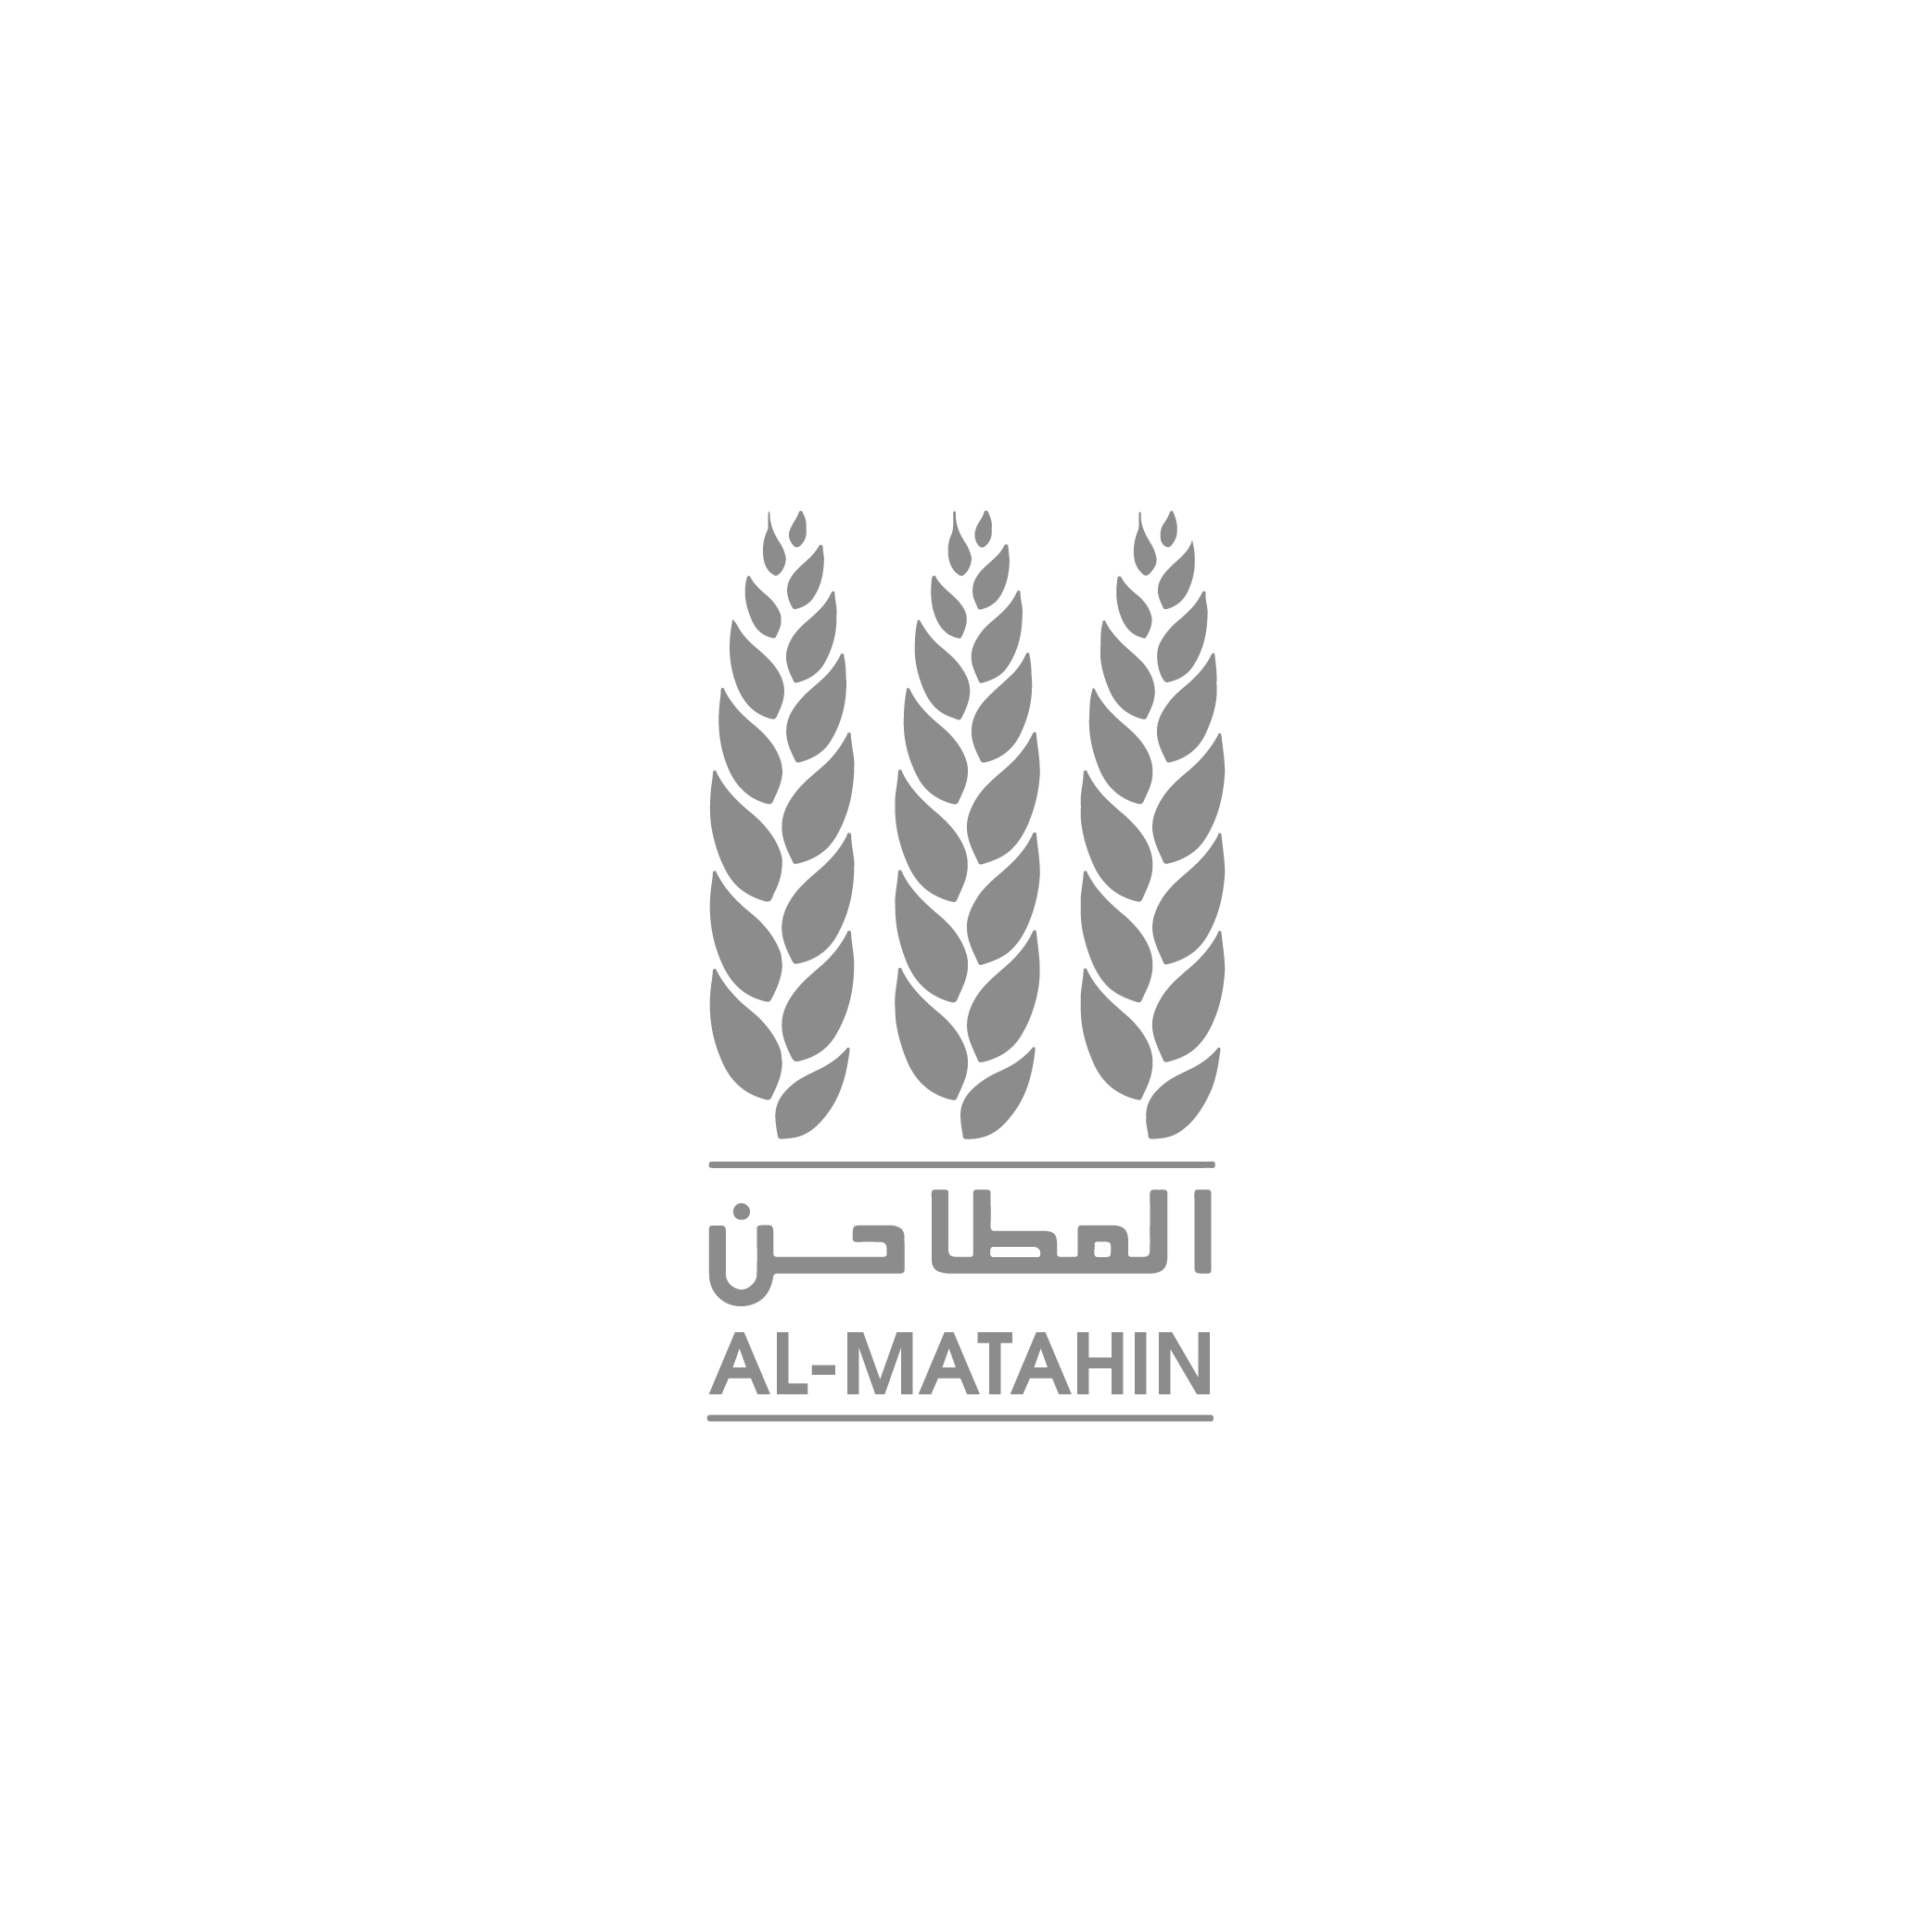 Al Matahin Not Storing Bran and Selling All Its Production in the Local Market